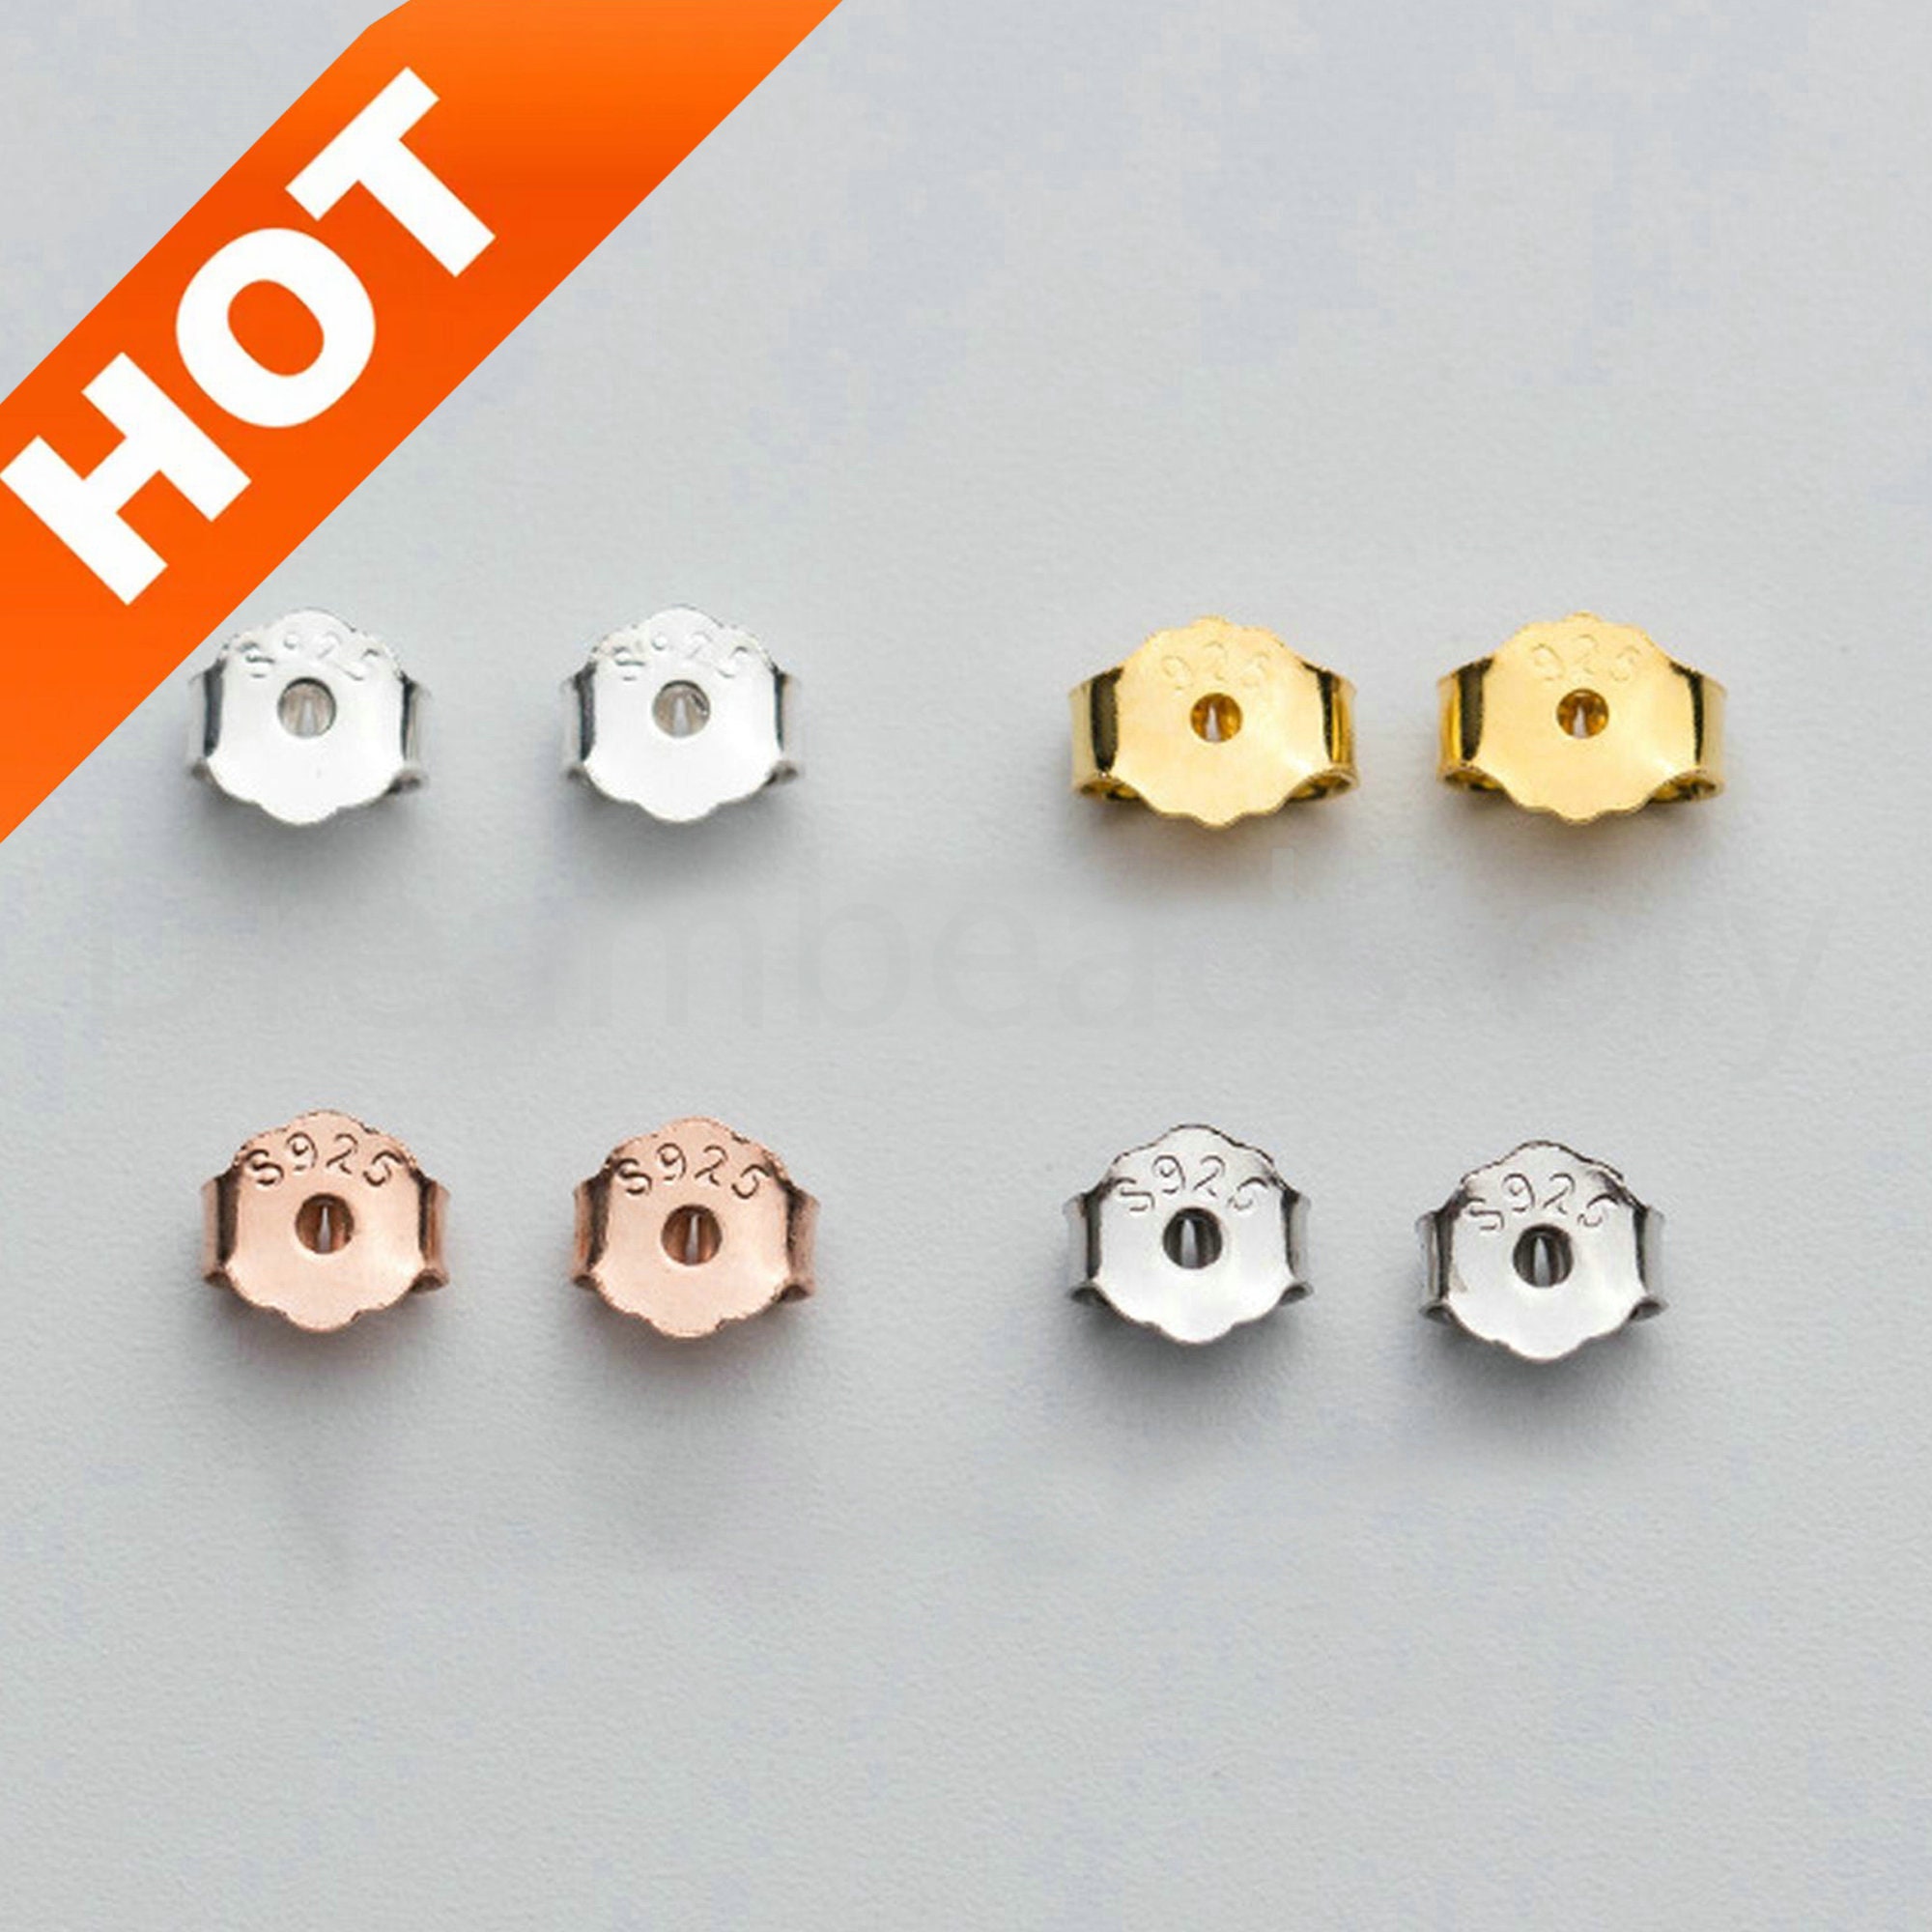 6mm x 4mm 10pcs Gold Plated 304 Stainless Steel Earring Backs Earnuts Wing  Nuts